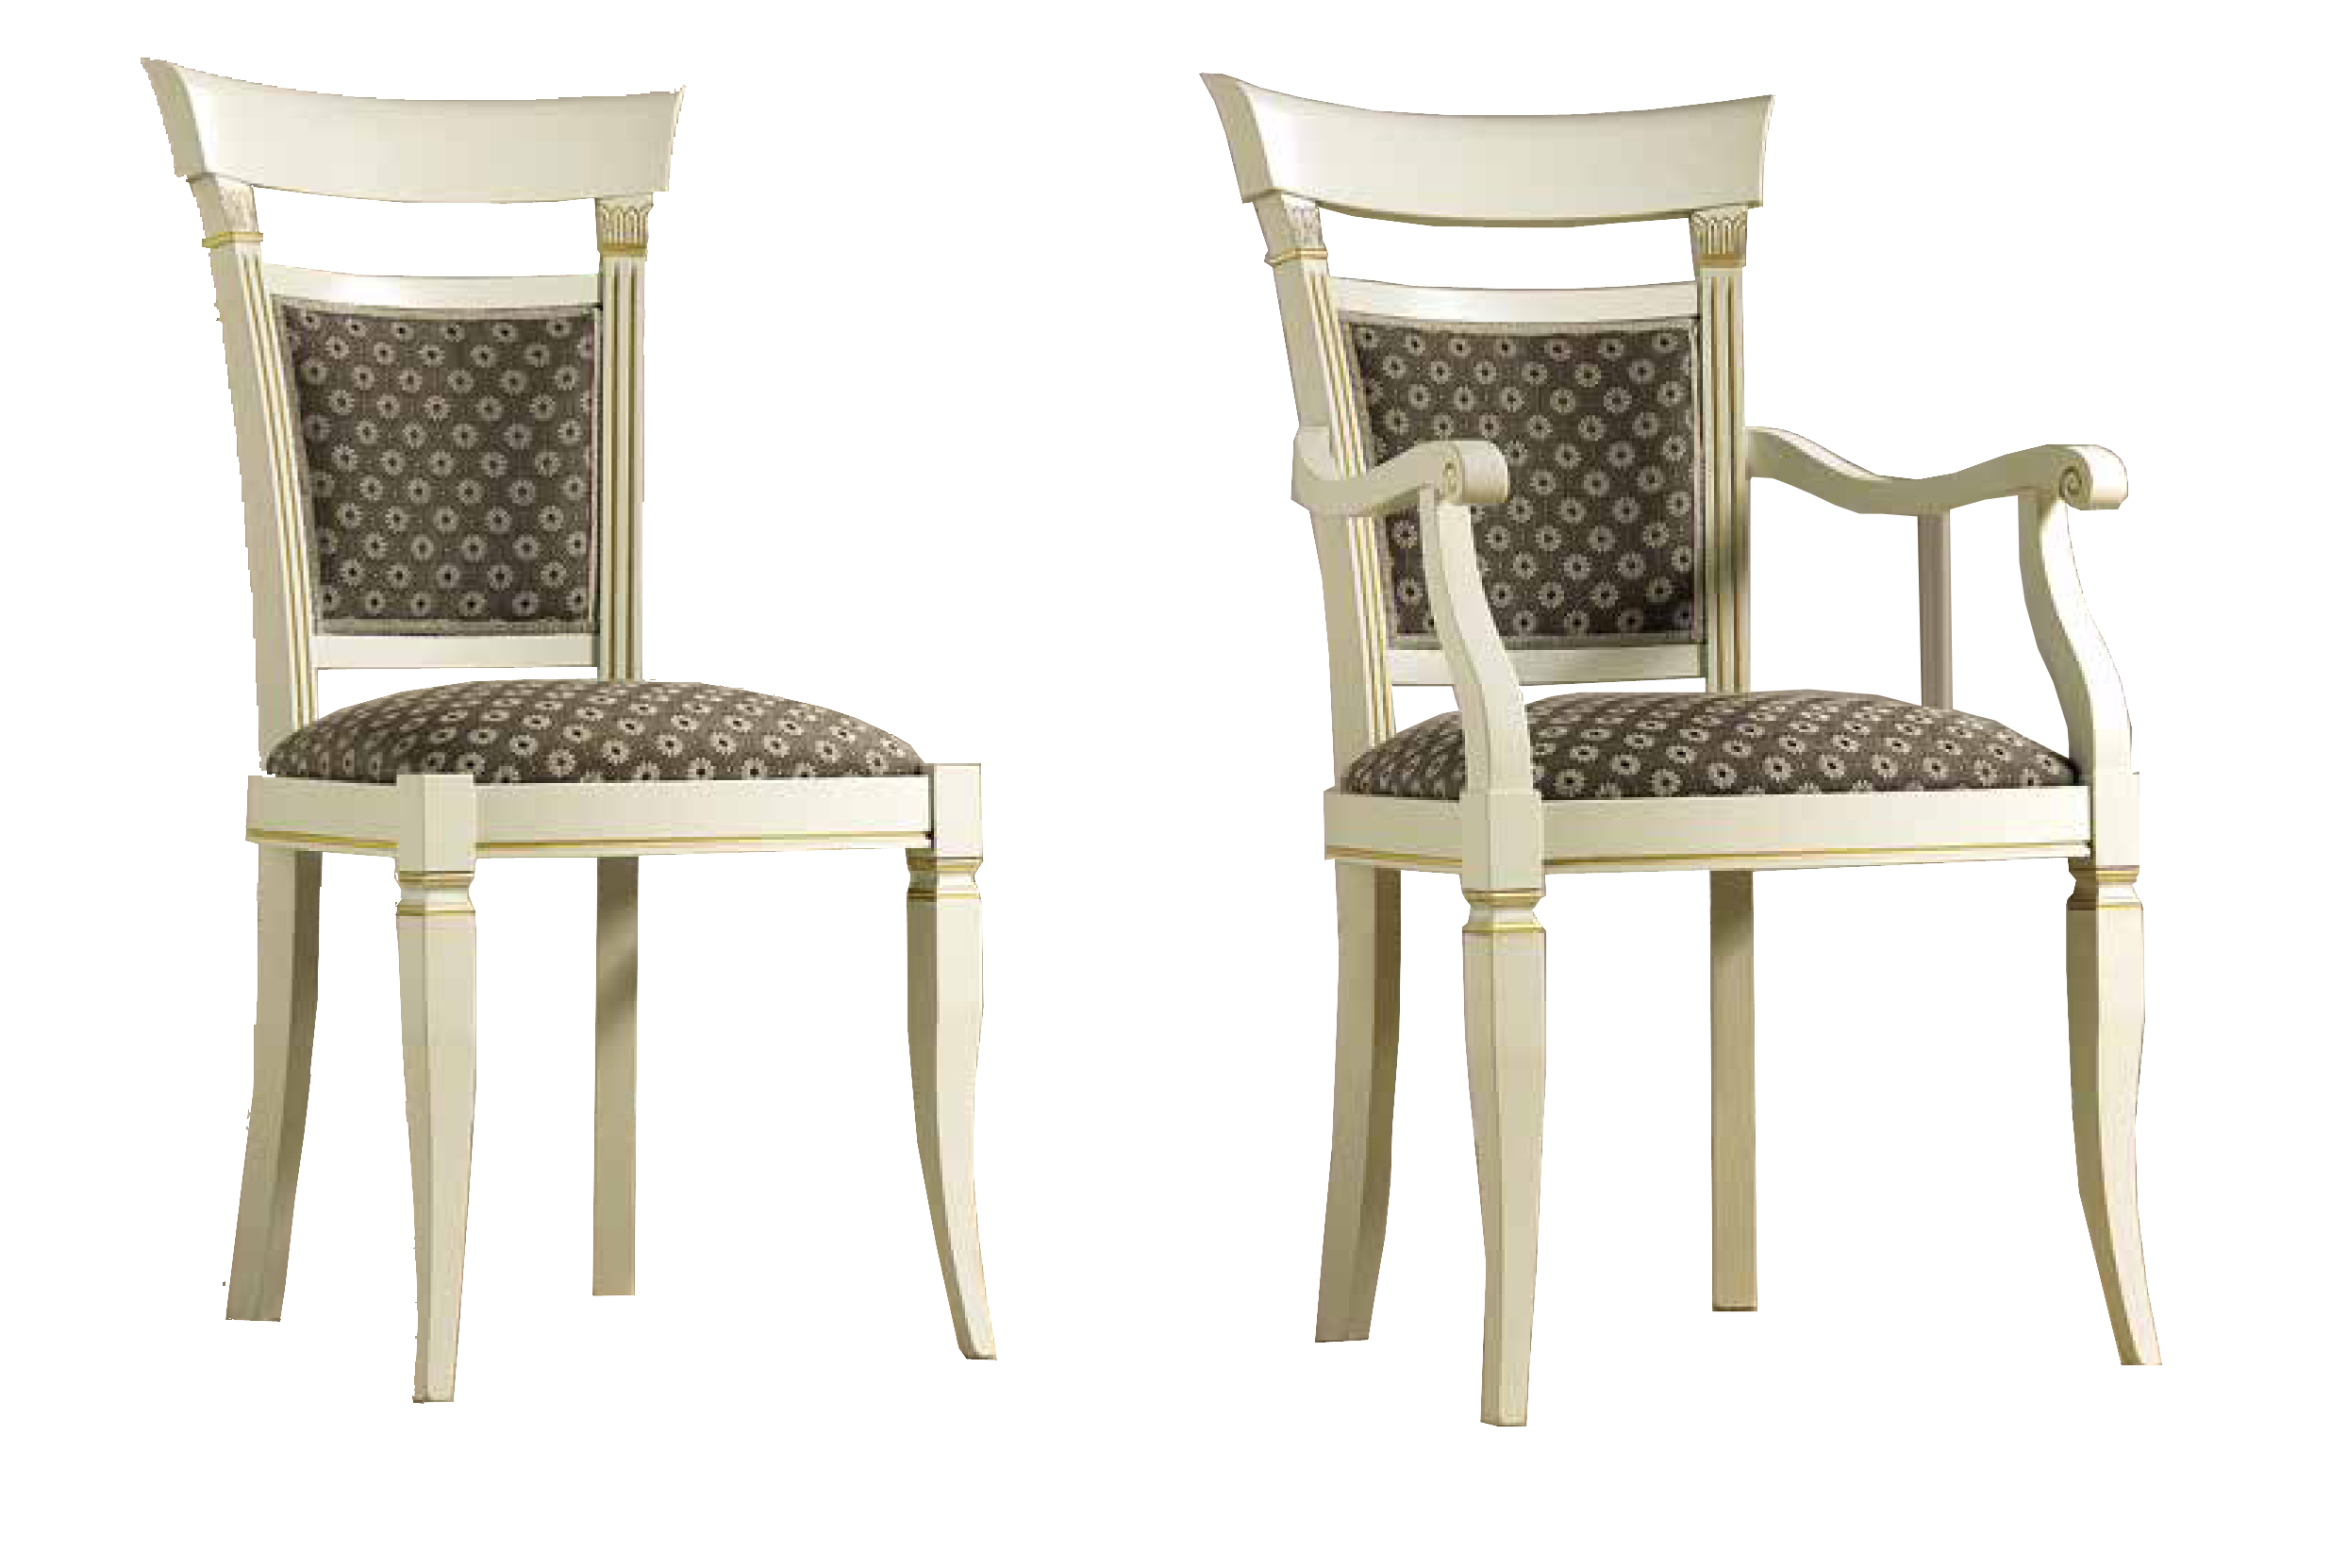 Brands Camel Classic Collection, Italy Treviso Chairs White Ash